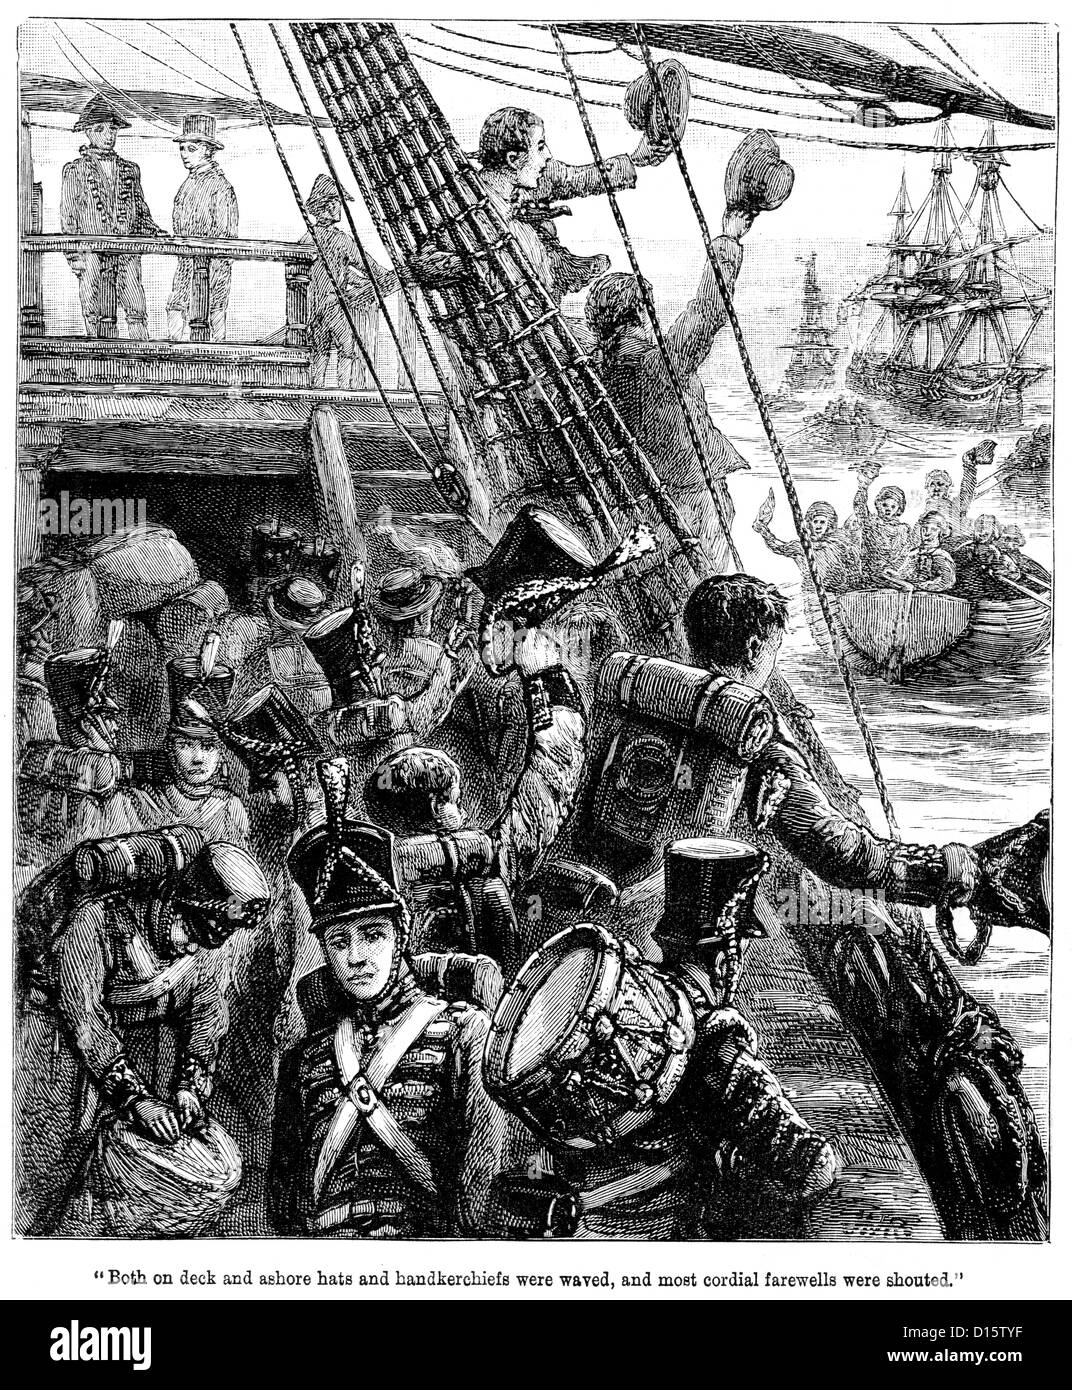 Victorian engraving of British soldier from the Napoleonic era departing for war aboard ships. Stock Photo